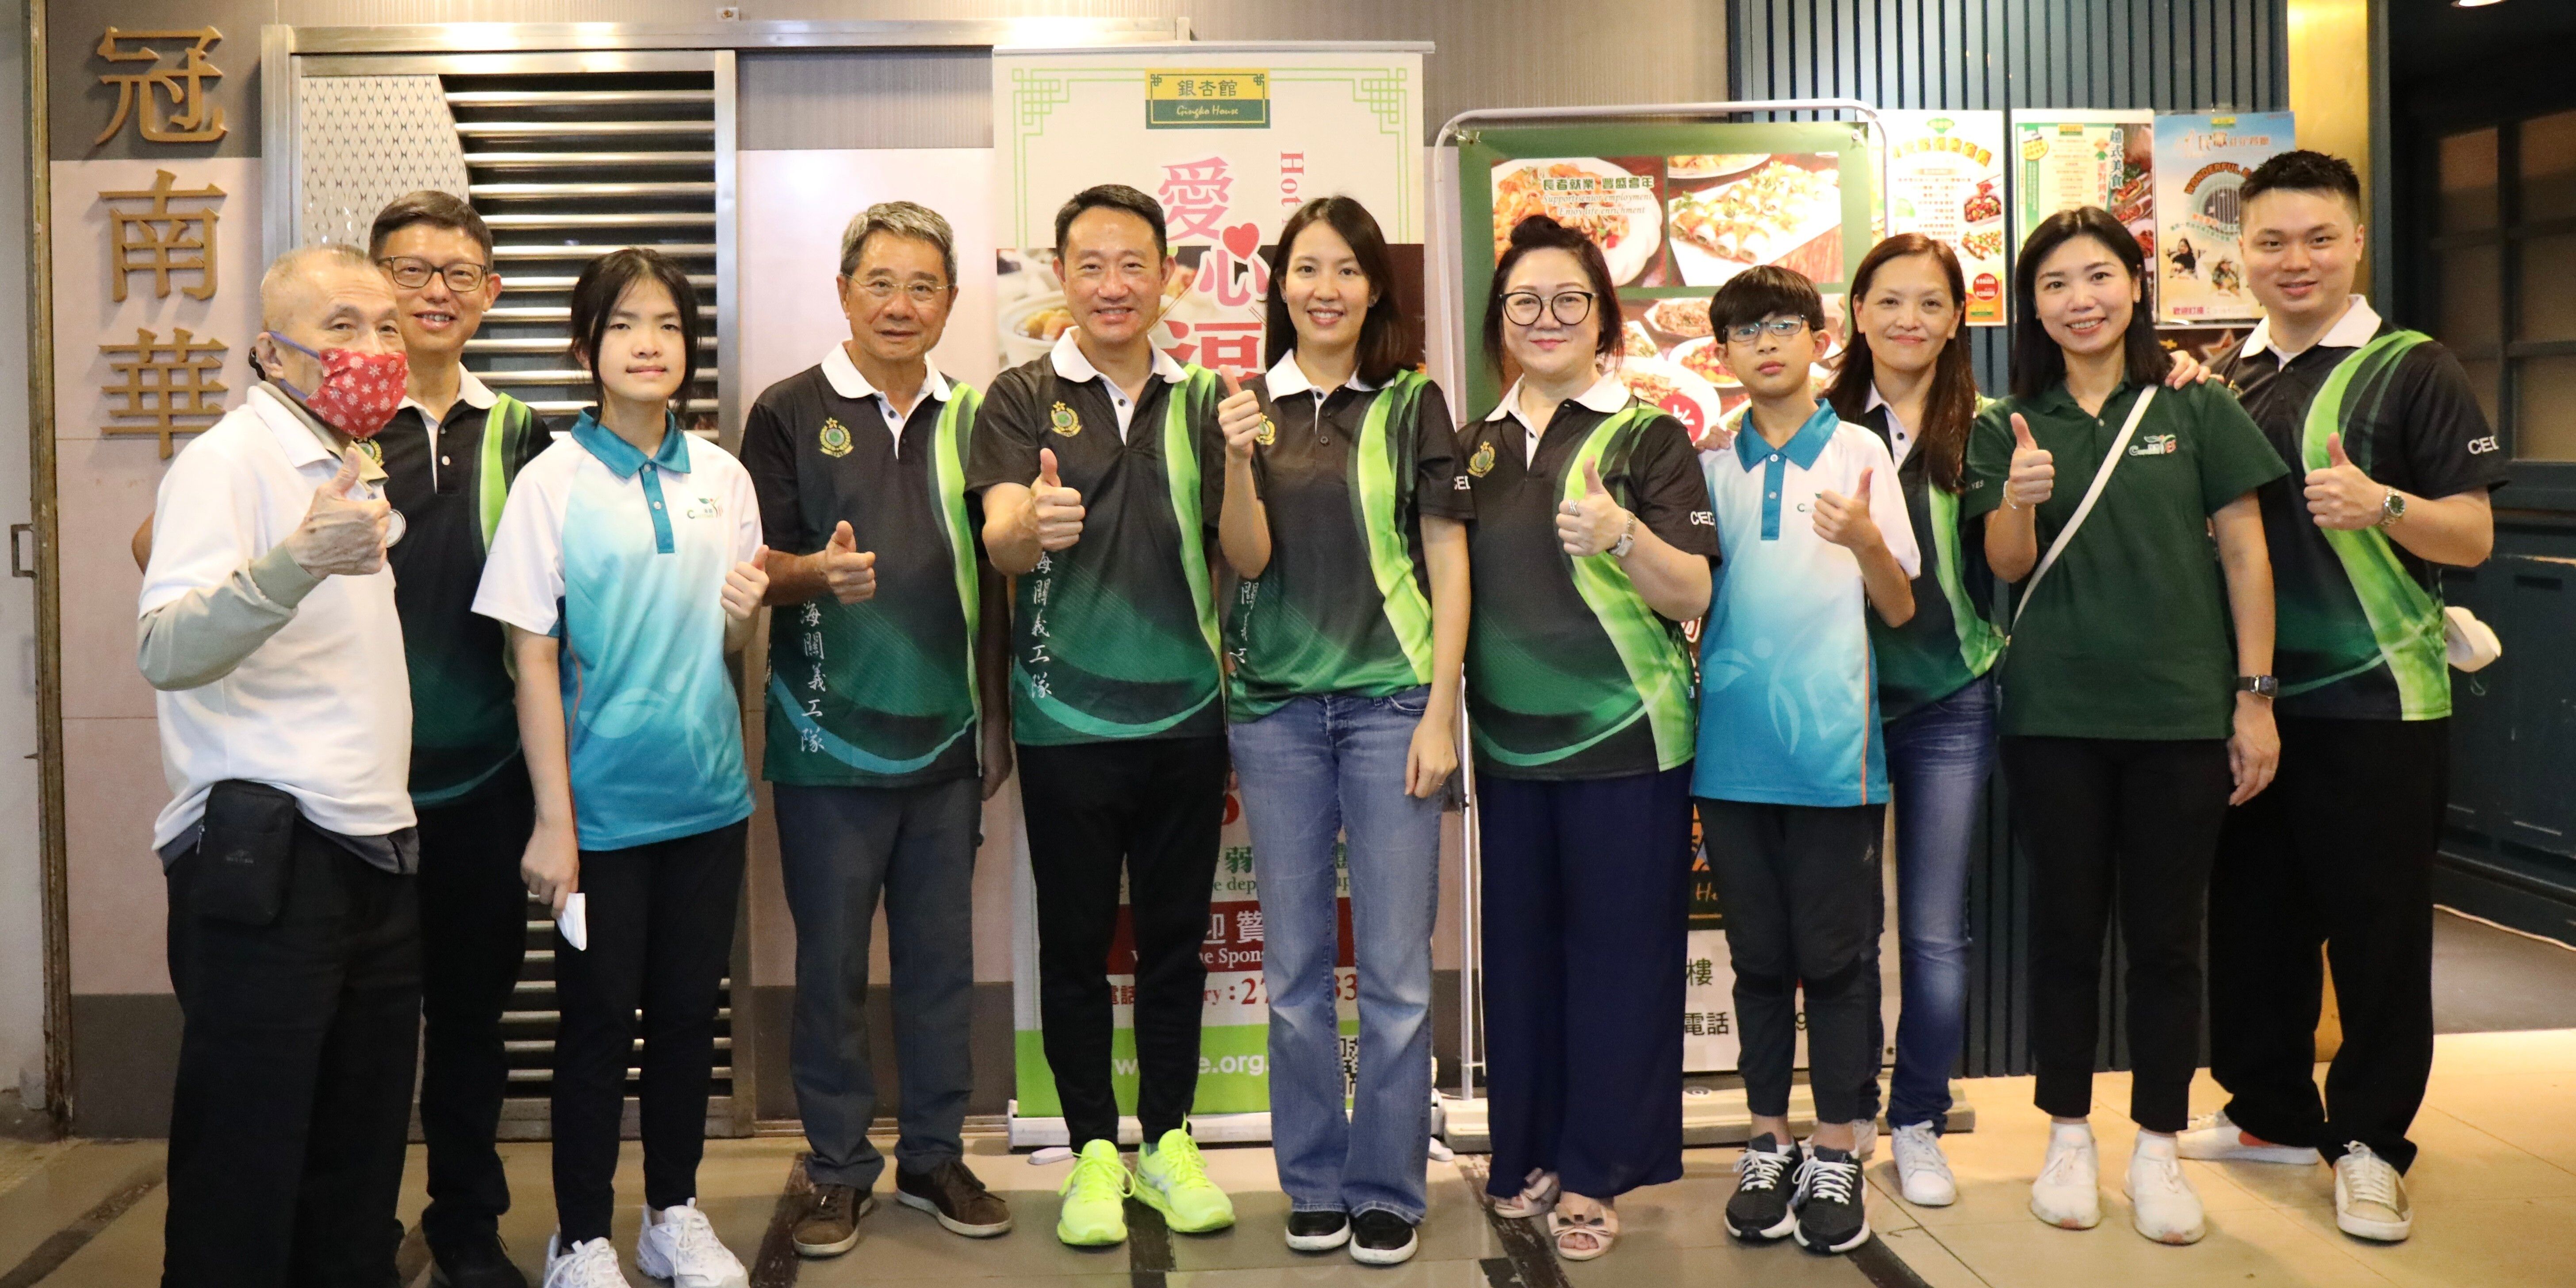 Hong Kong Customs Volunteer Team Connects with Donors Building a Caring Community Together